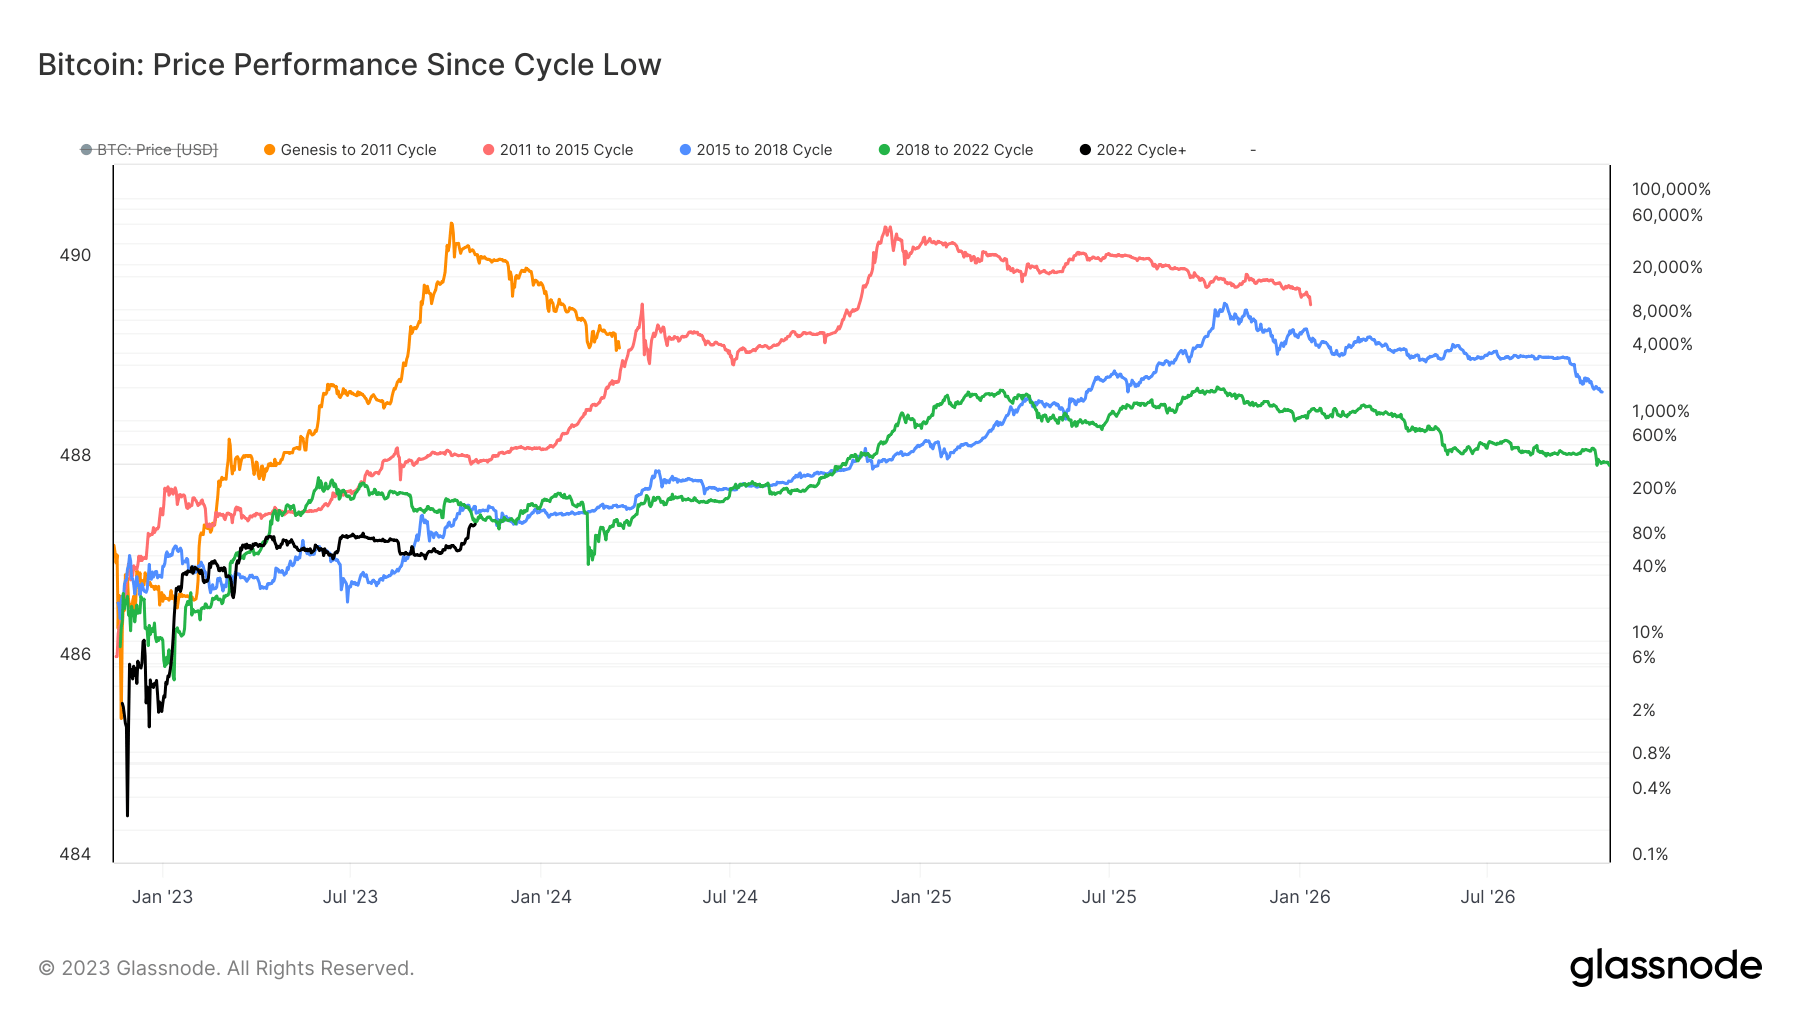 BTC Price Performance Since Cycle Low: (Source: Glassnode)